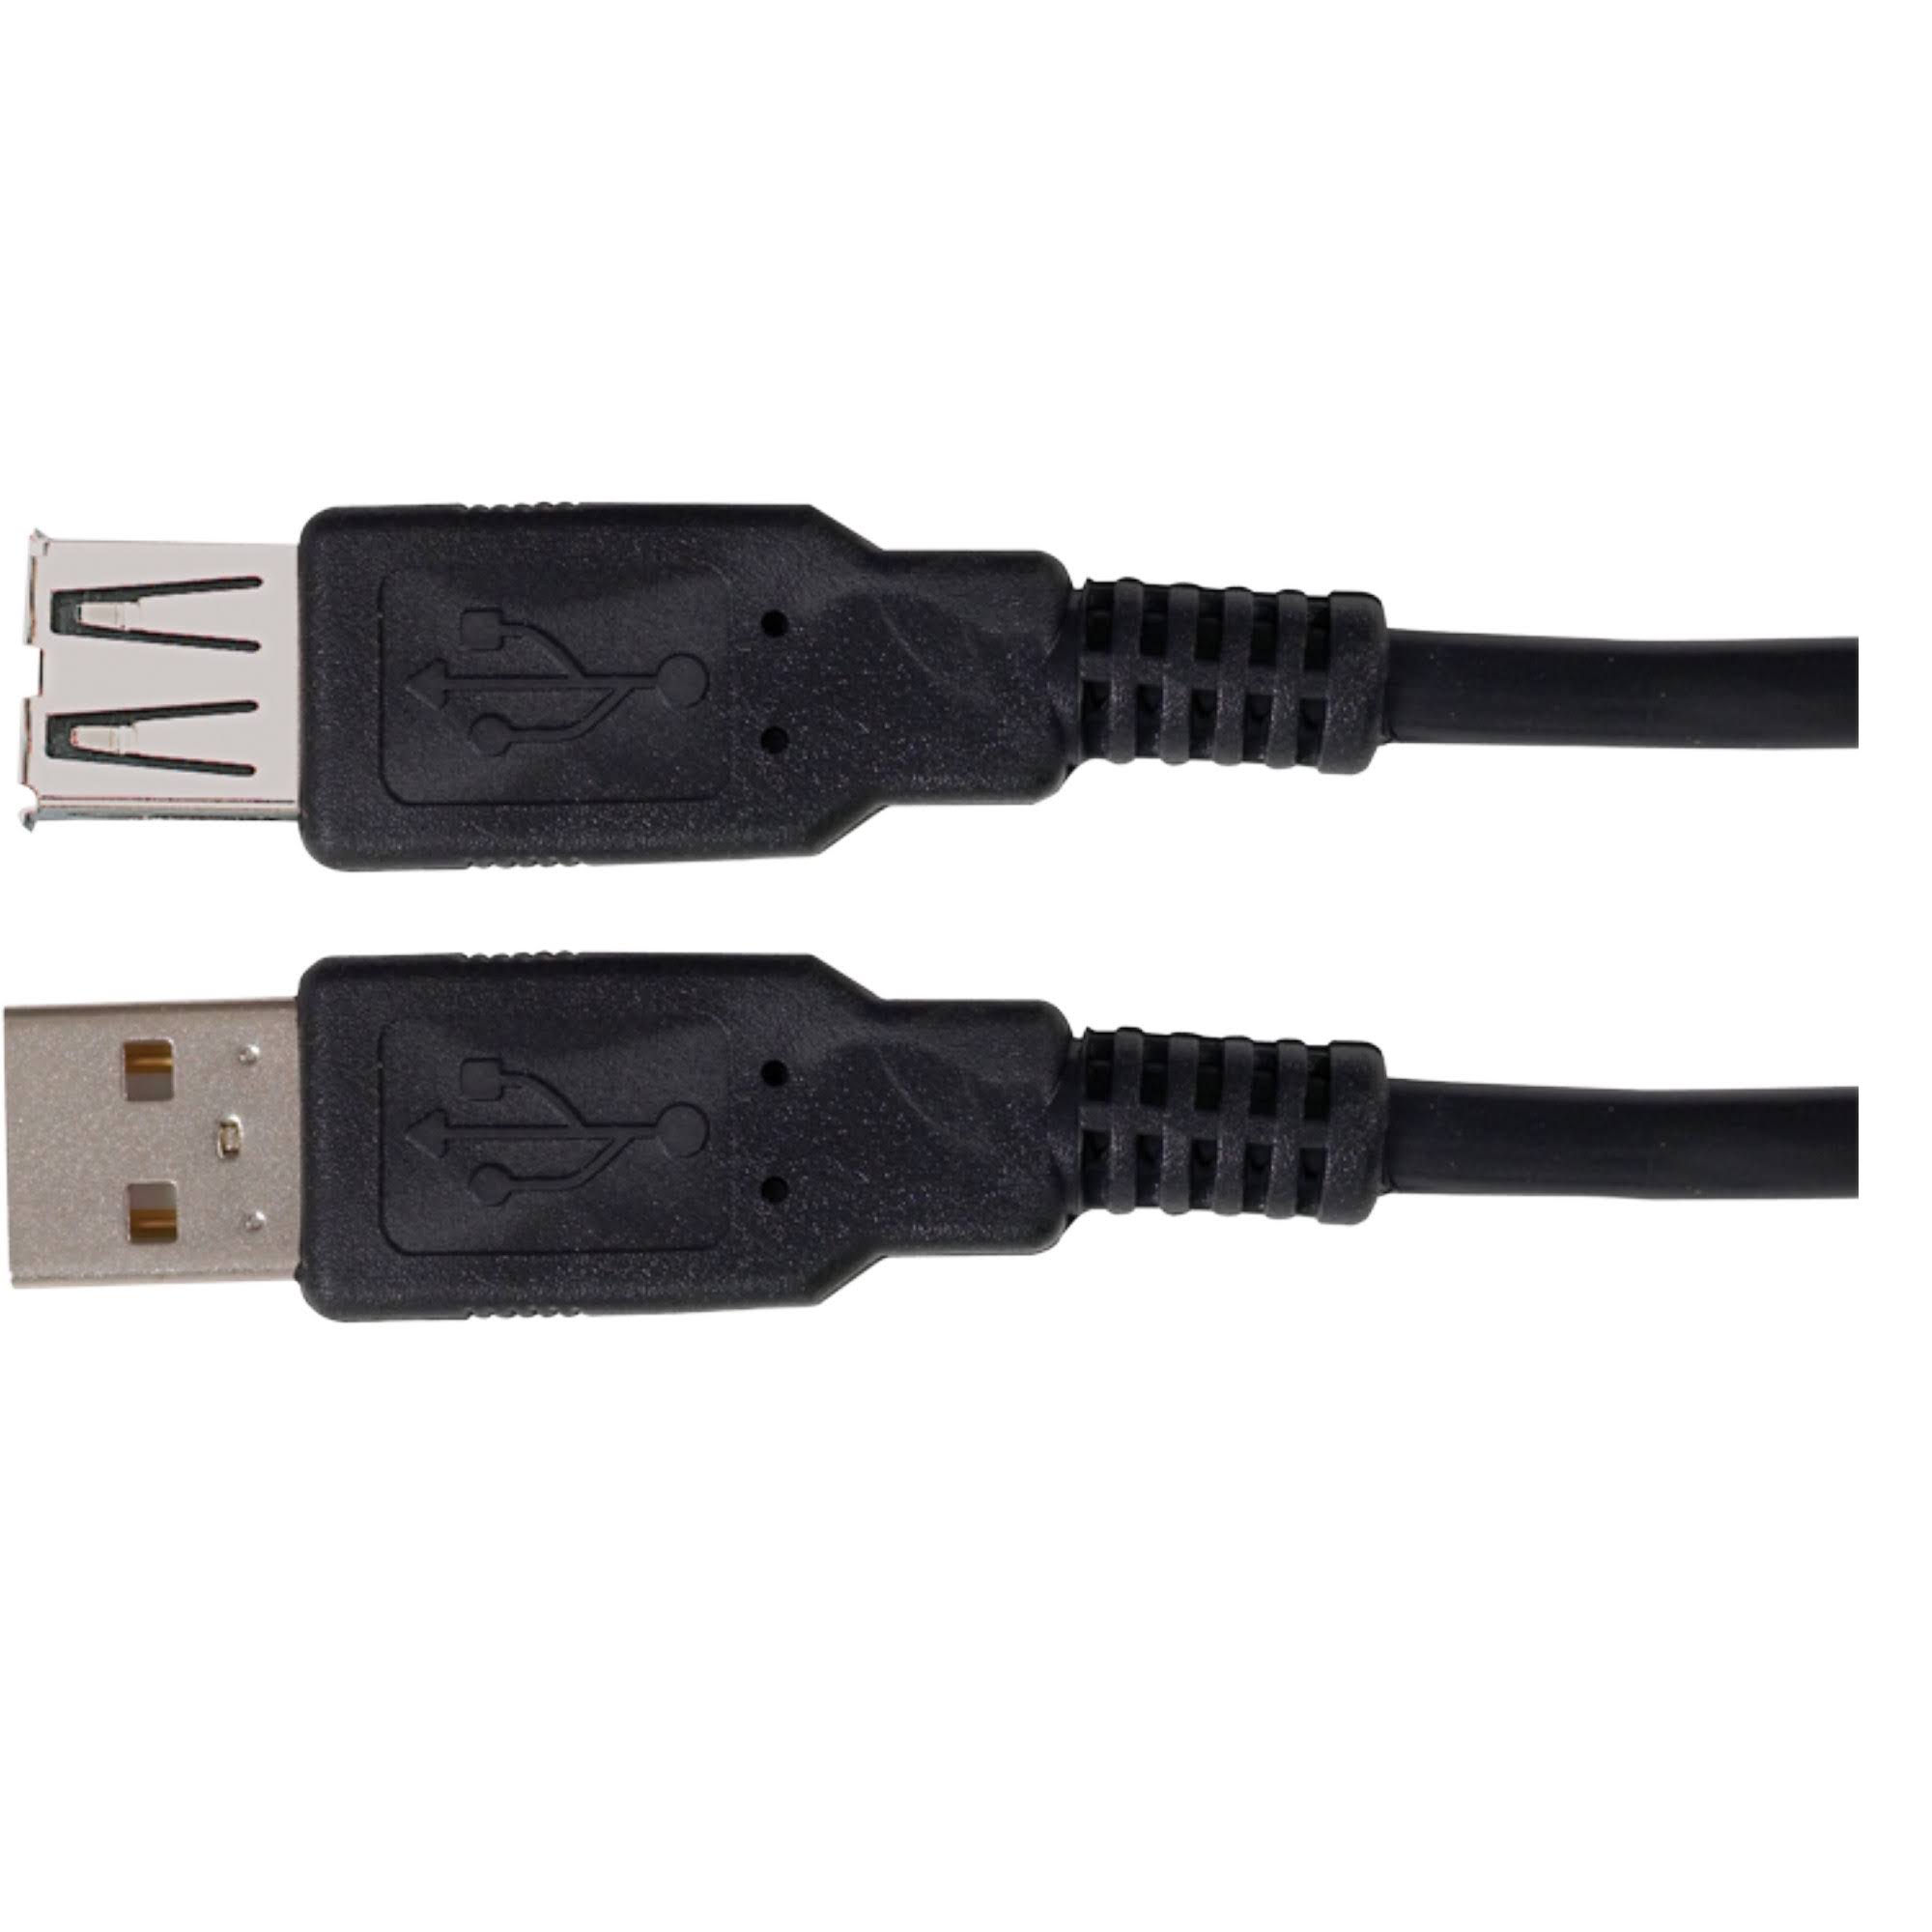 Audiovox USB Extension Cable - 10'